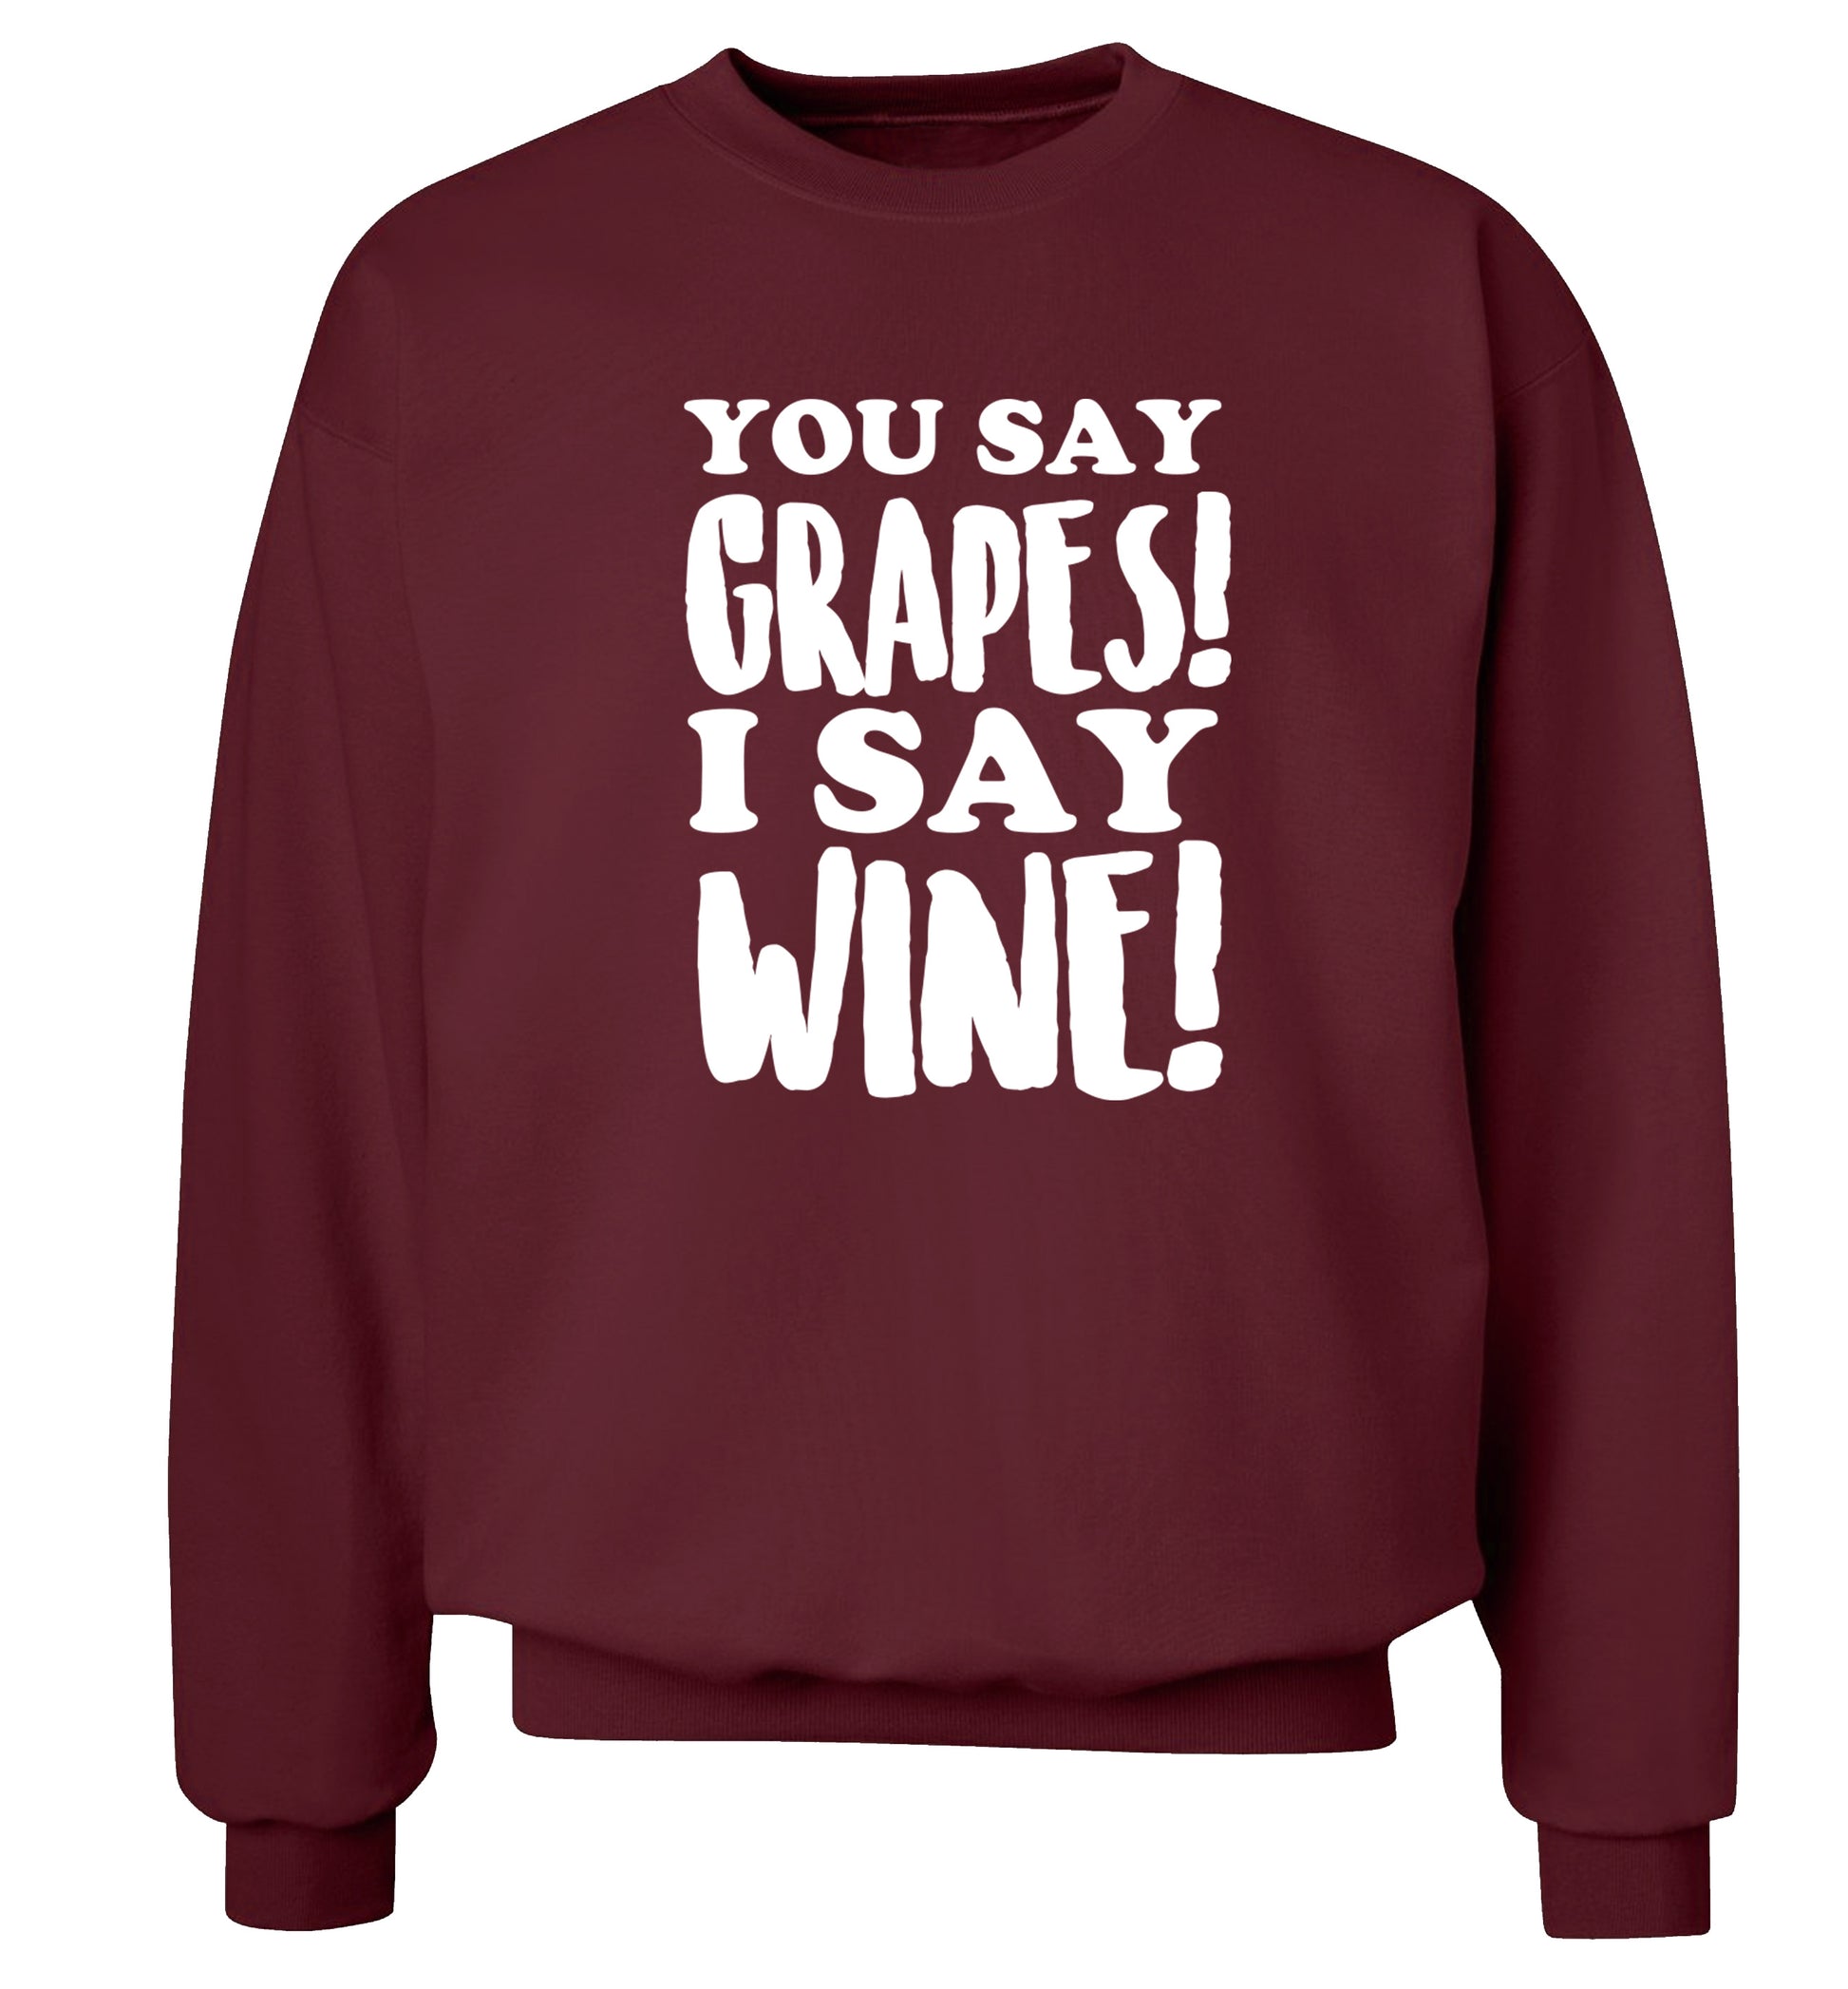 You say grapes I say wine! Adult's unisex maroon Sweater 2XL